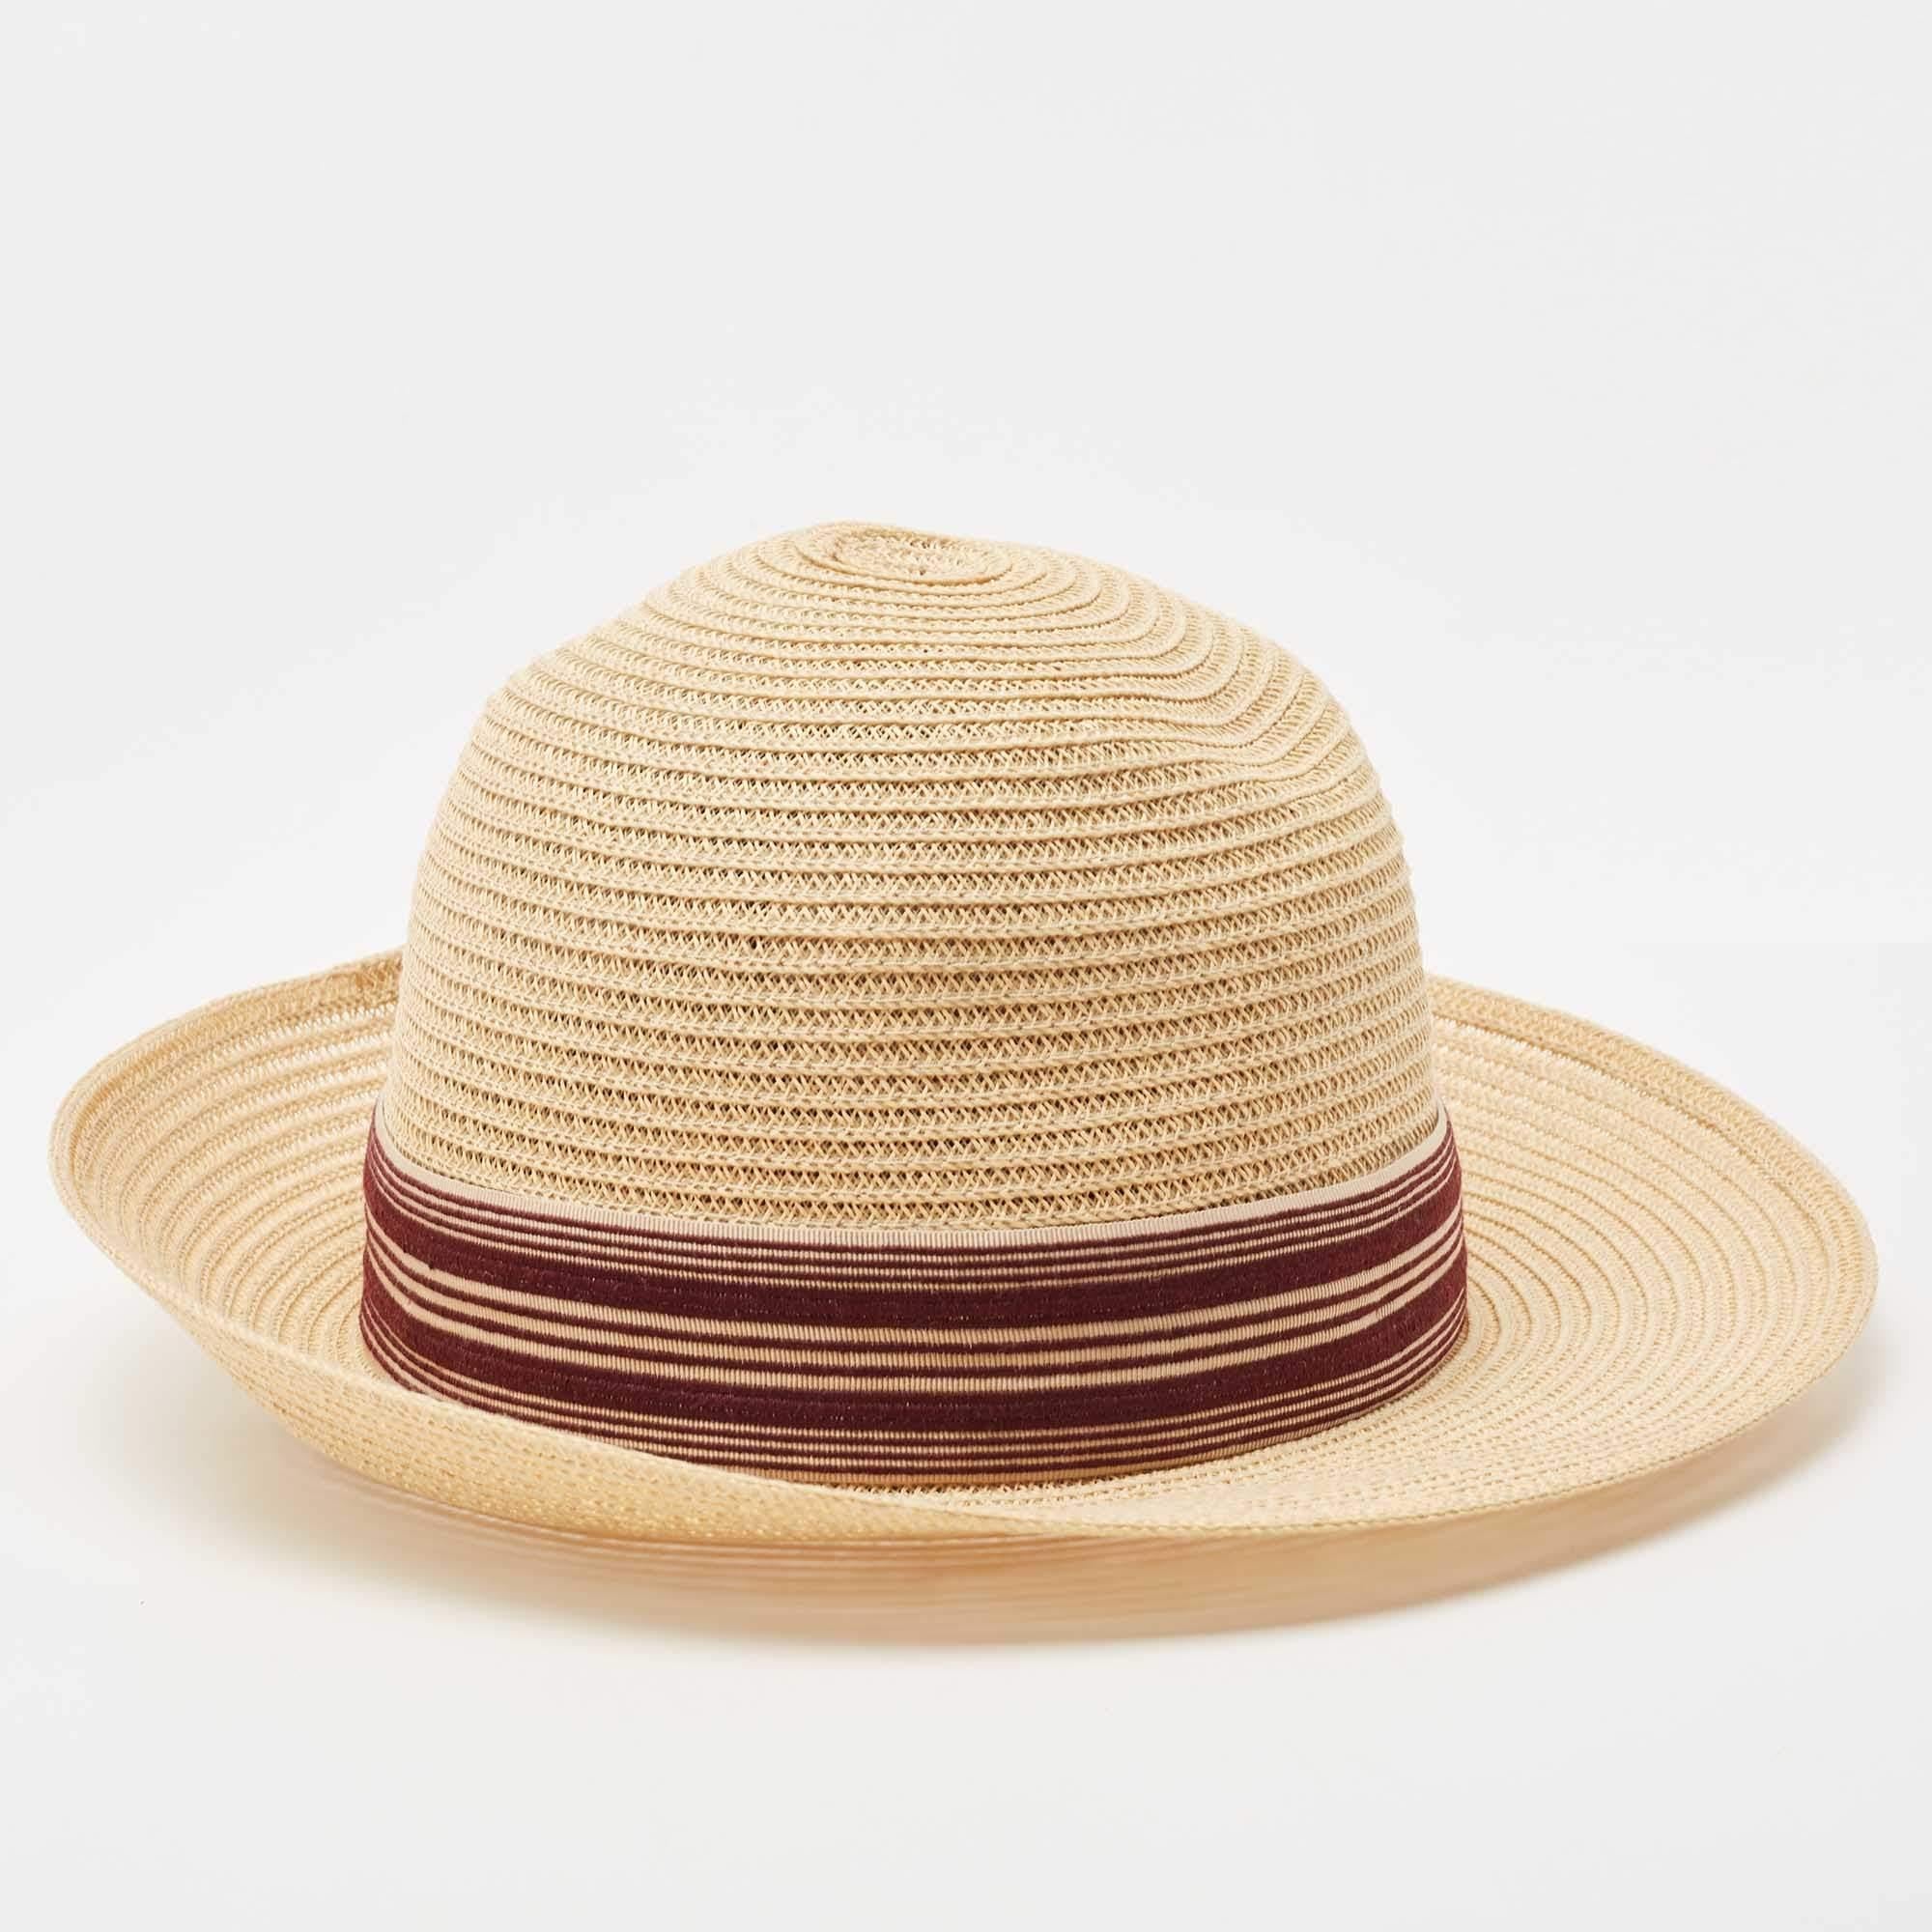 This hat by Dior is one accessory your summer wardrobe has been missing! It has been crafted from beige staw. It features a complementing ribbon band that encircles the hat. Be it picnics or beach vacations, it is sure to amp up your